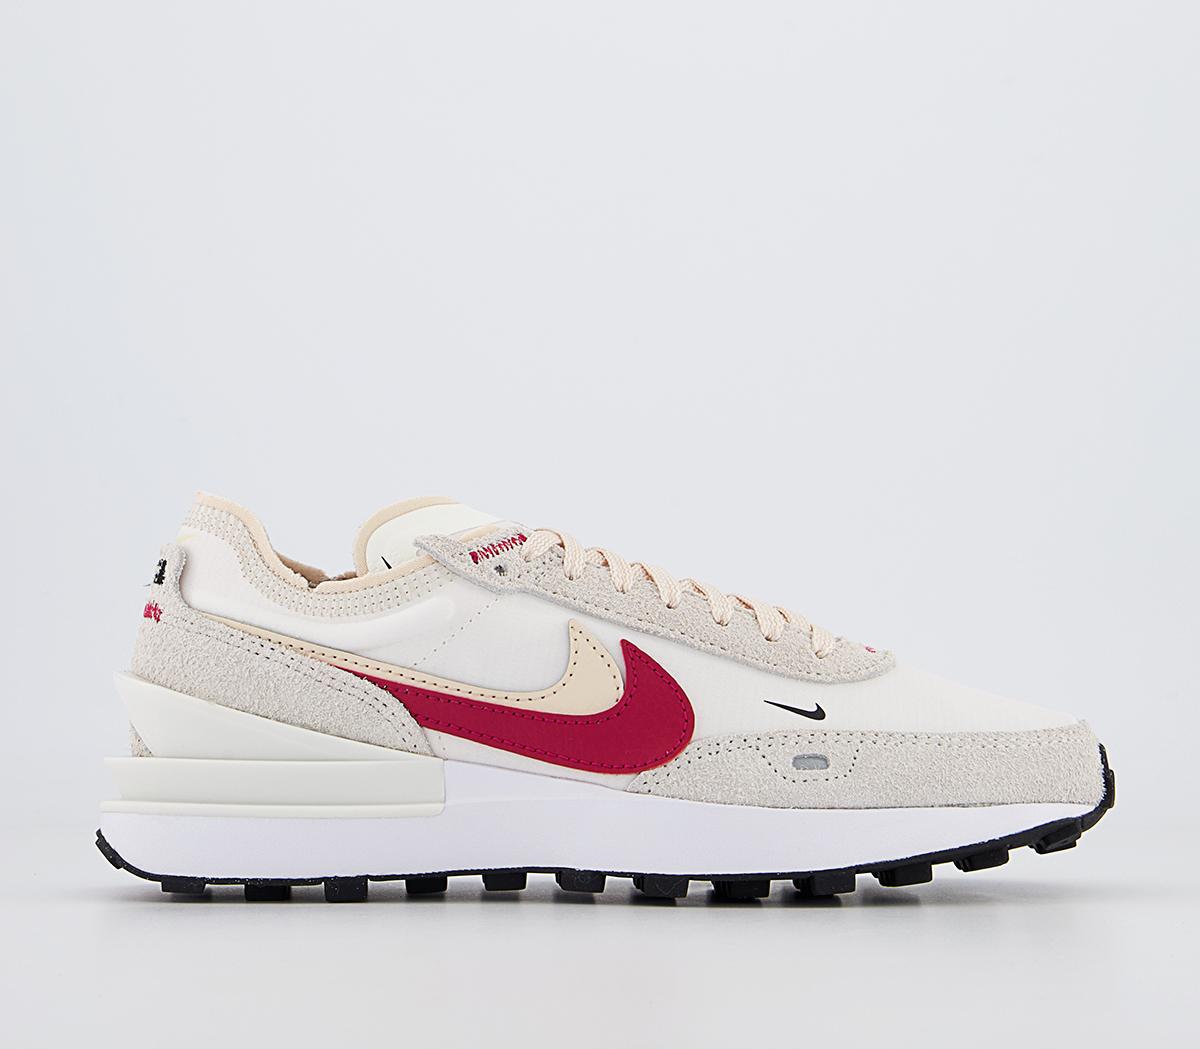 Outlook Afwijzen inzet Nike Nike Waffle One Trainers Sail Gym Red Pearl White Black - Women's  Trainers